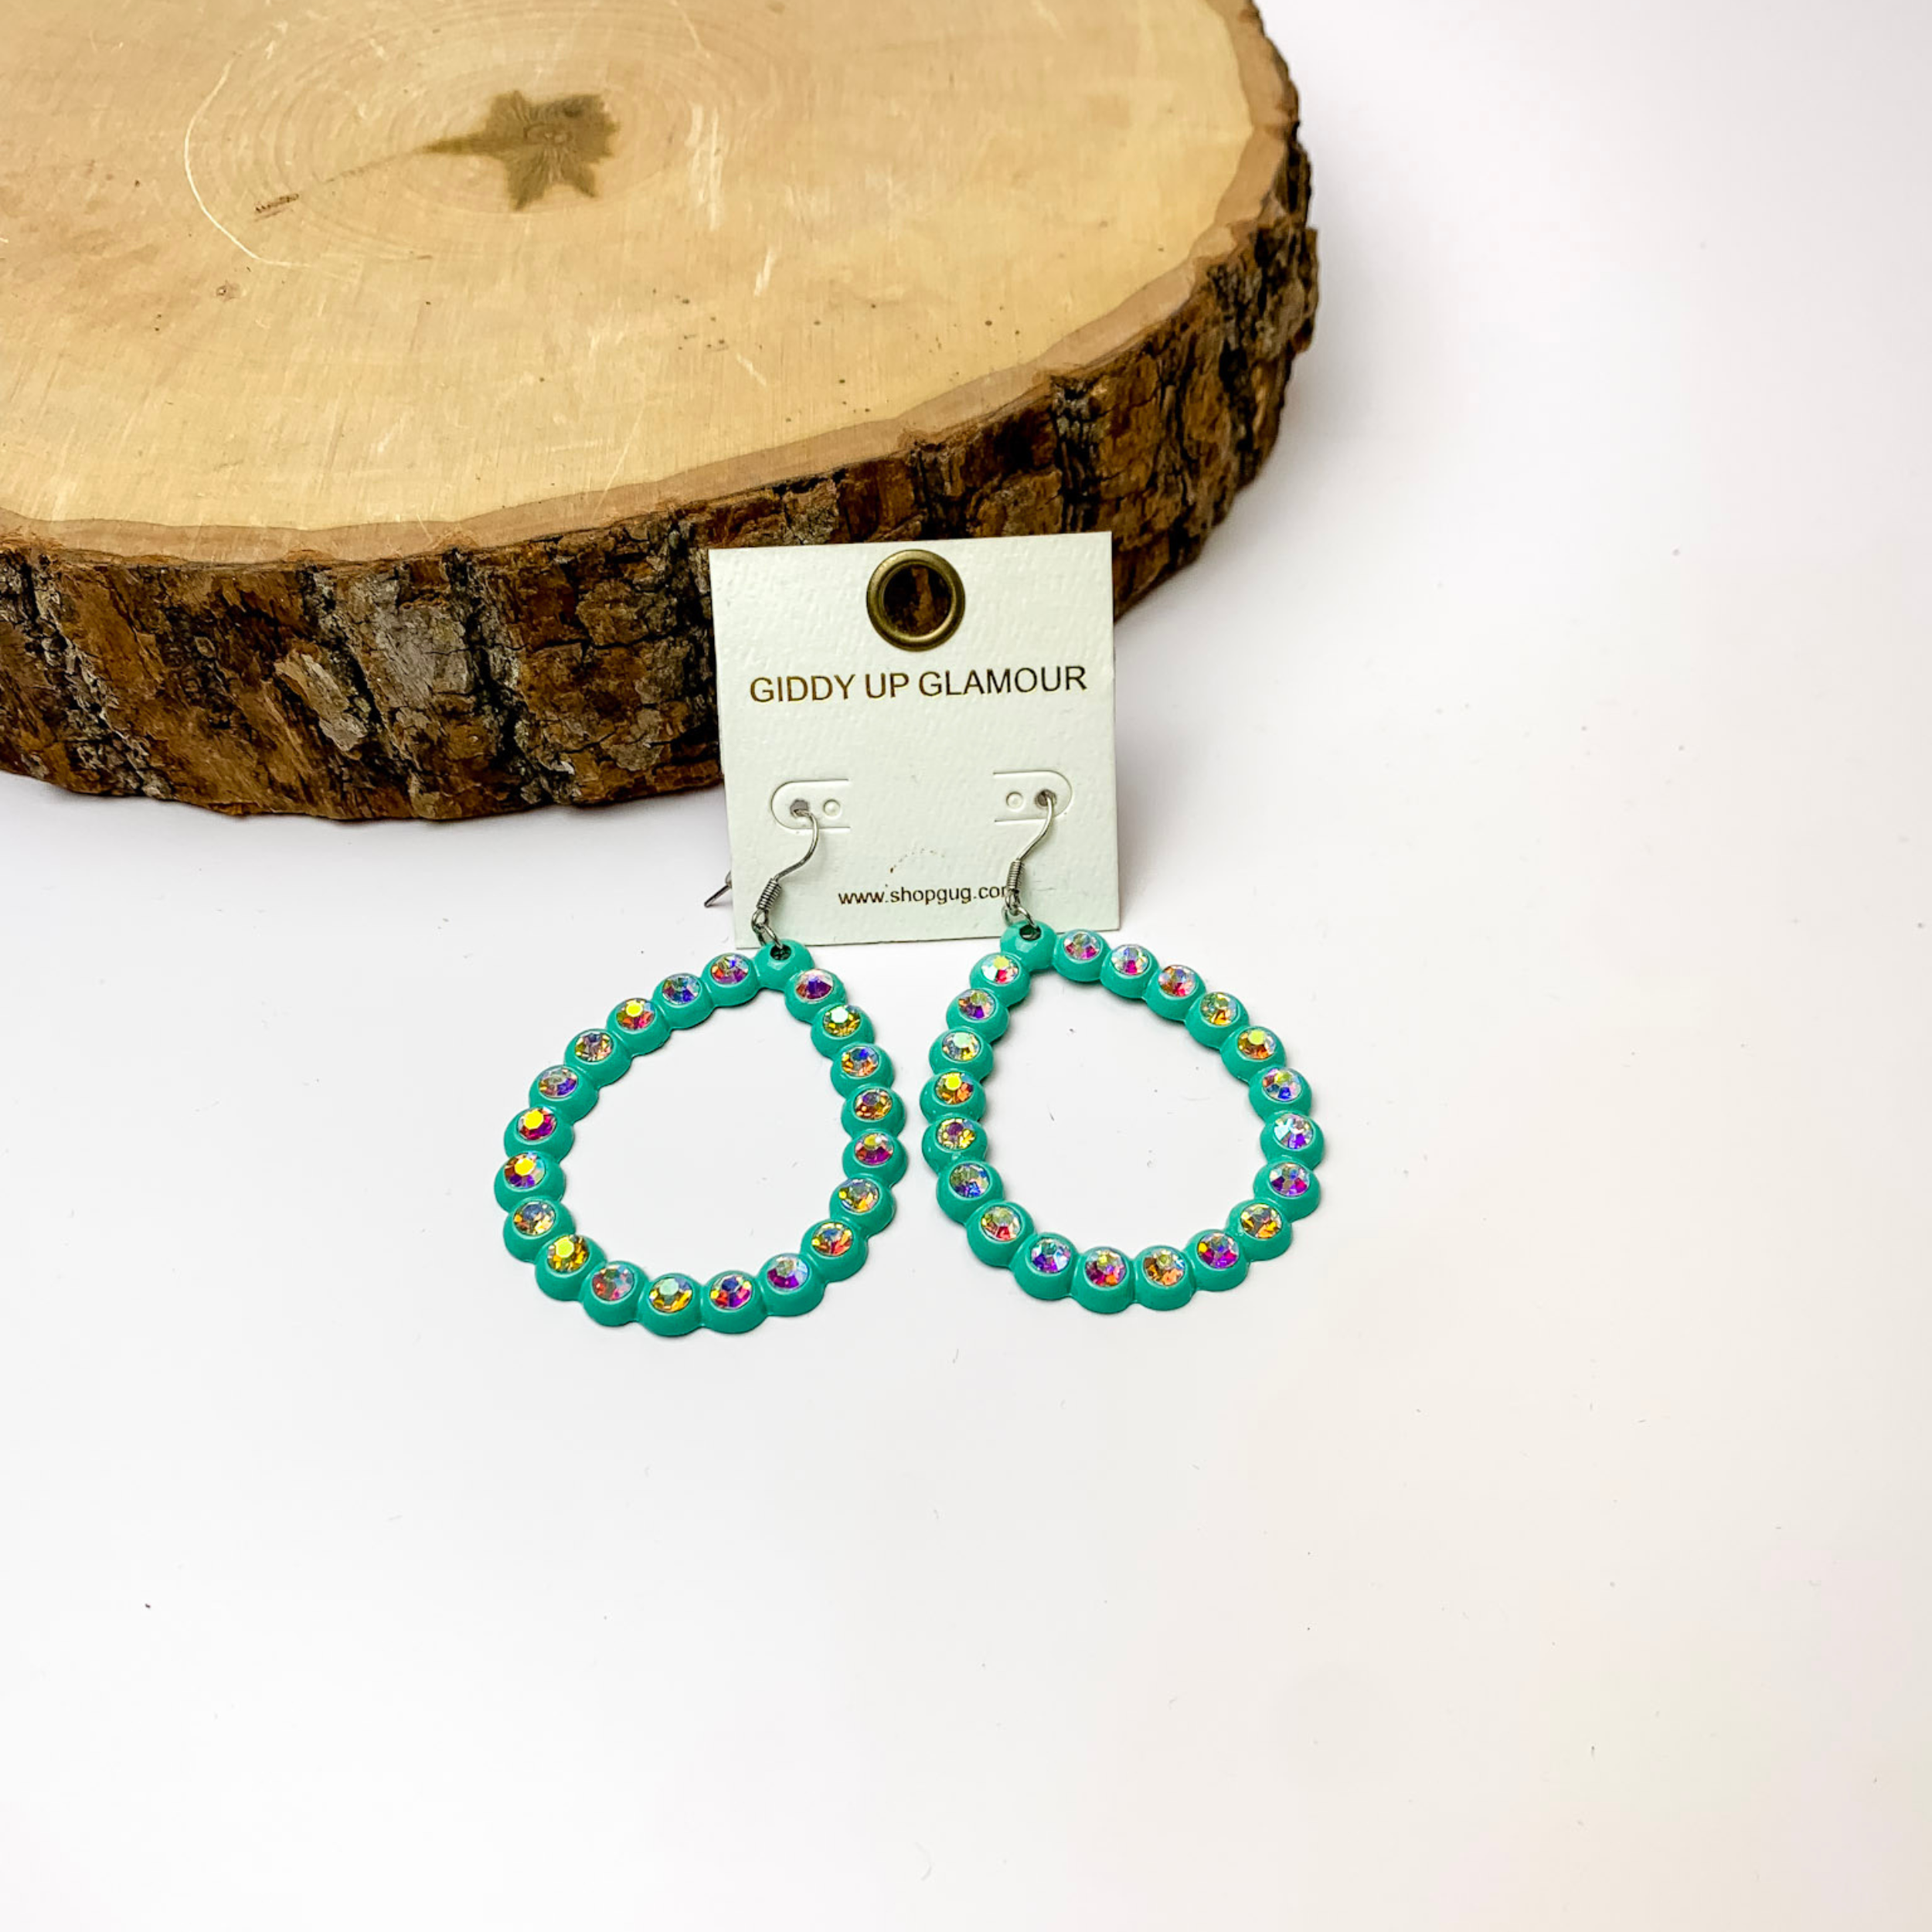 Cushion Cut Open Teardrop Earrings with AB Crystals in Turquoise - Giddy Up Glamour Boutique